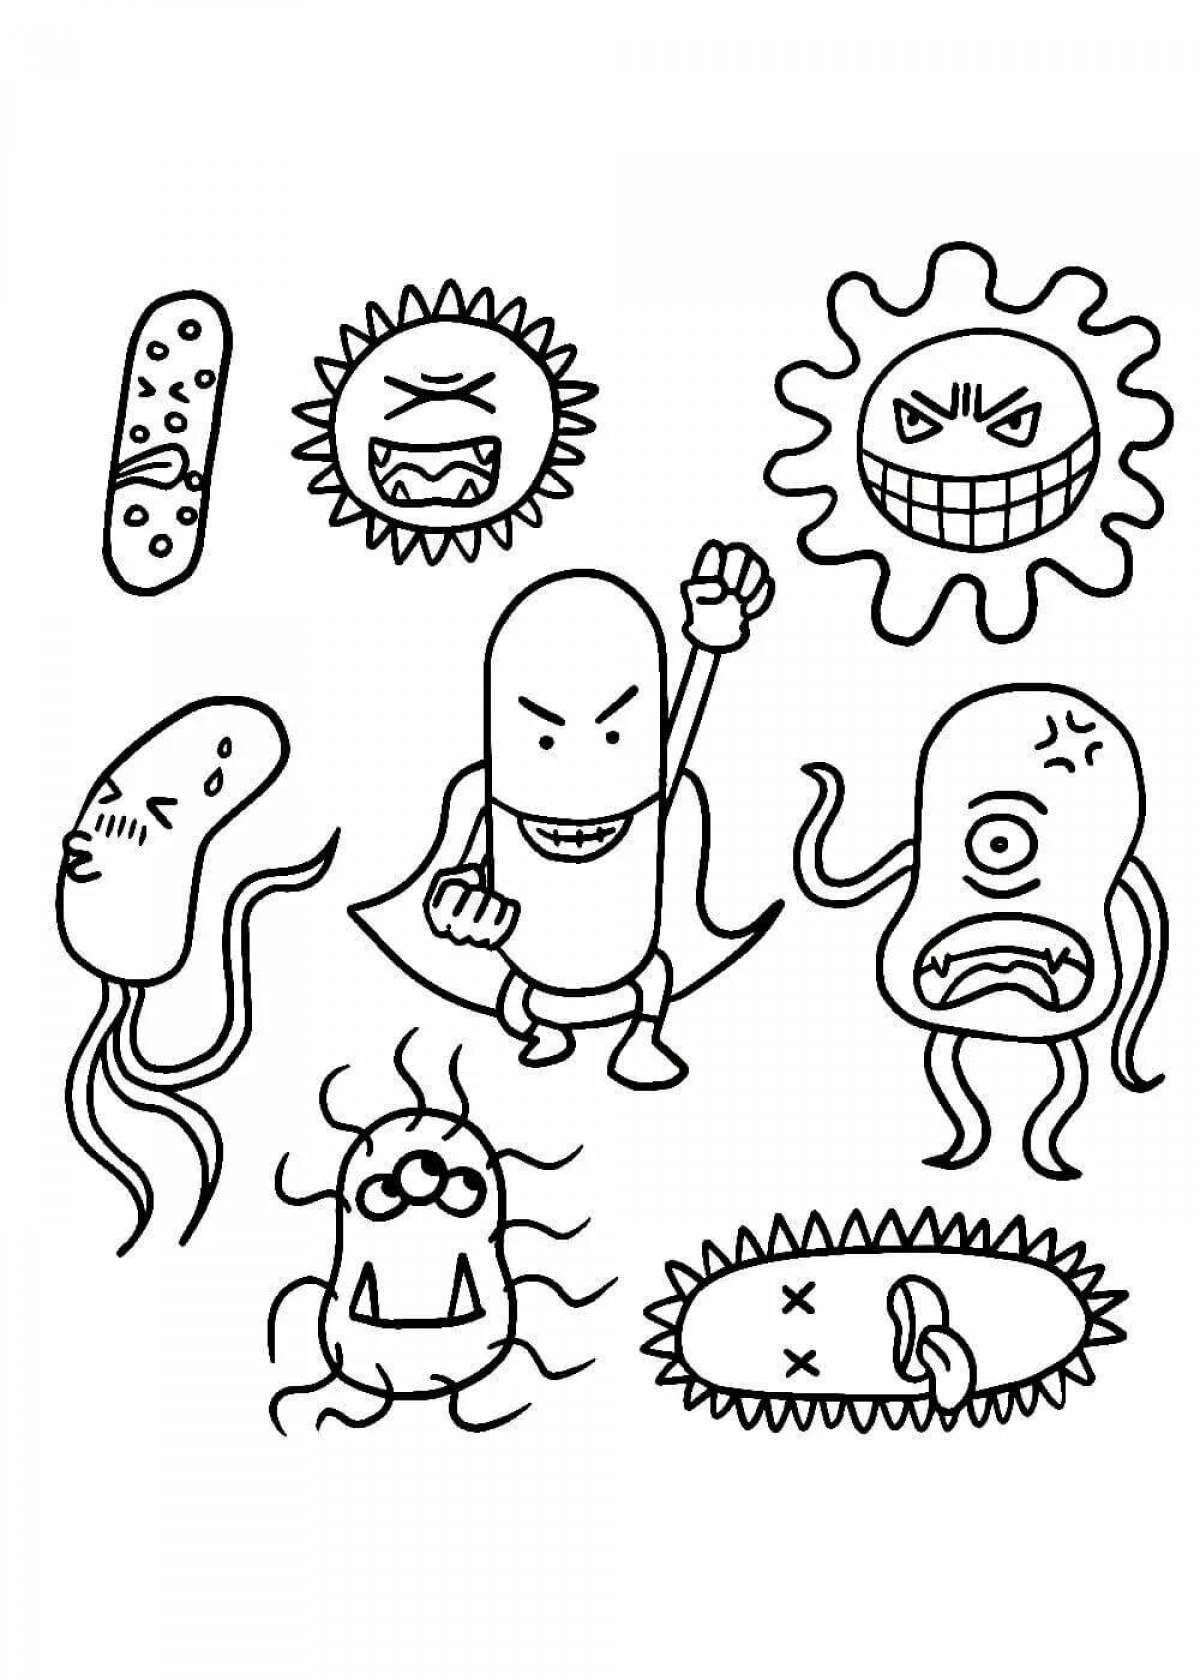 Educational coloring of microbes and bacteria